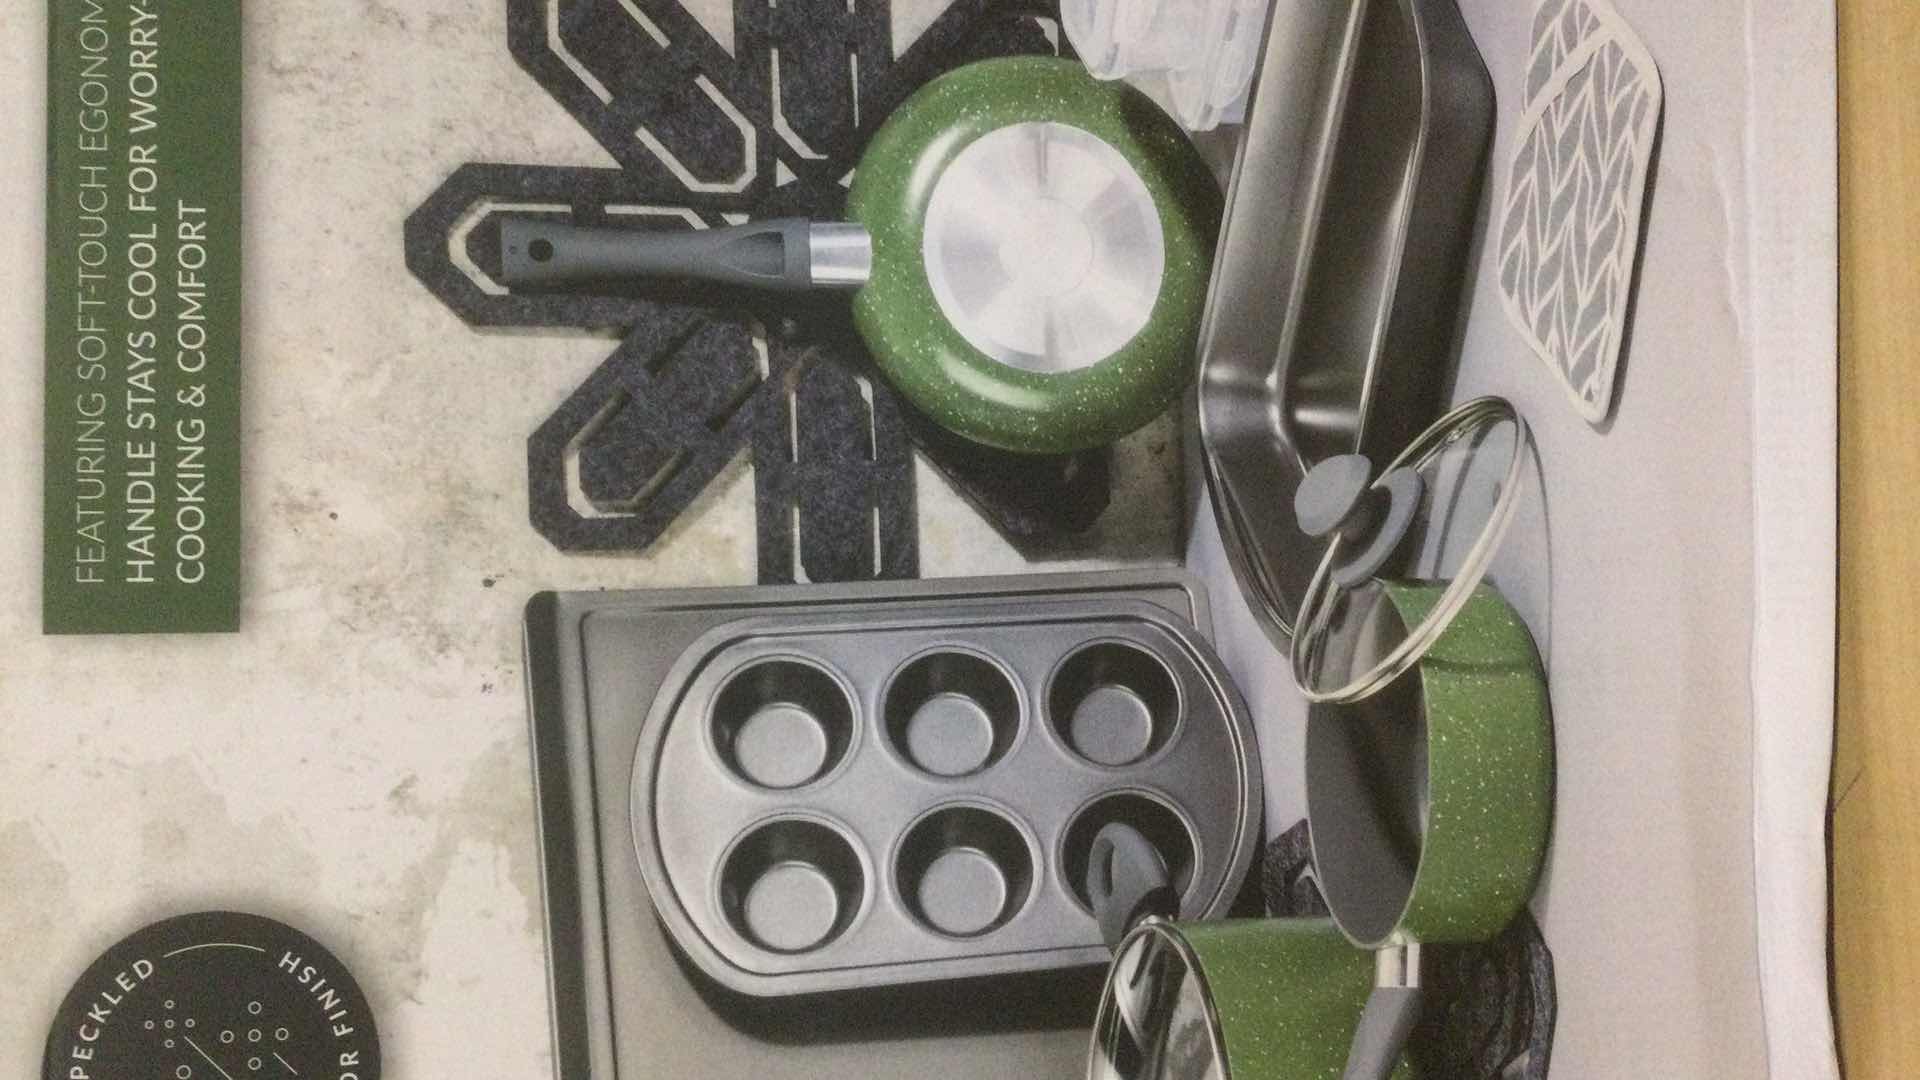 Photo 2 of NEW BKLYN STEELC SELECT 16-PIECE NONSTICK COOK & BAKEWARE SET GREEN